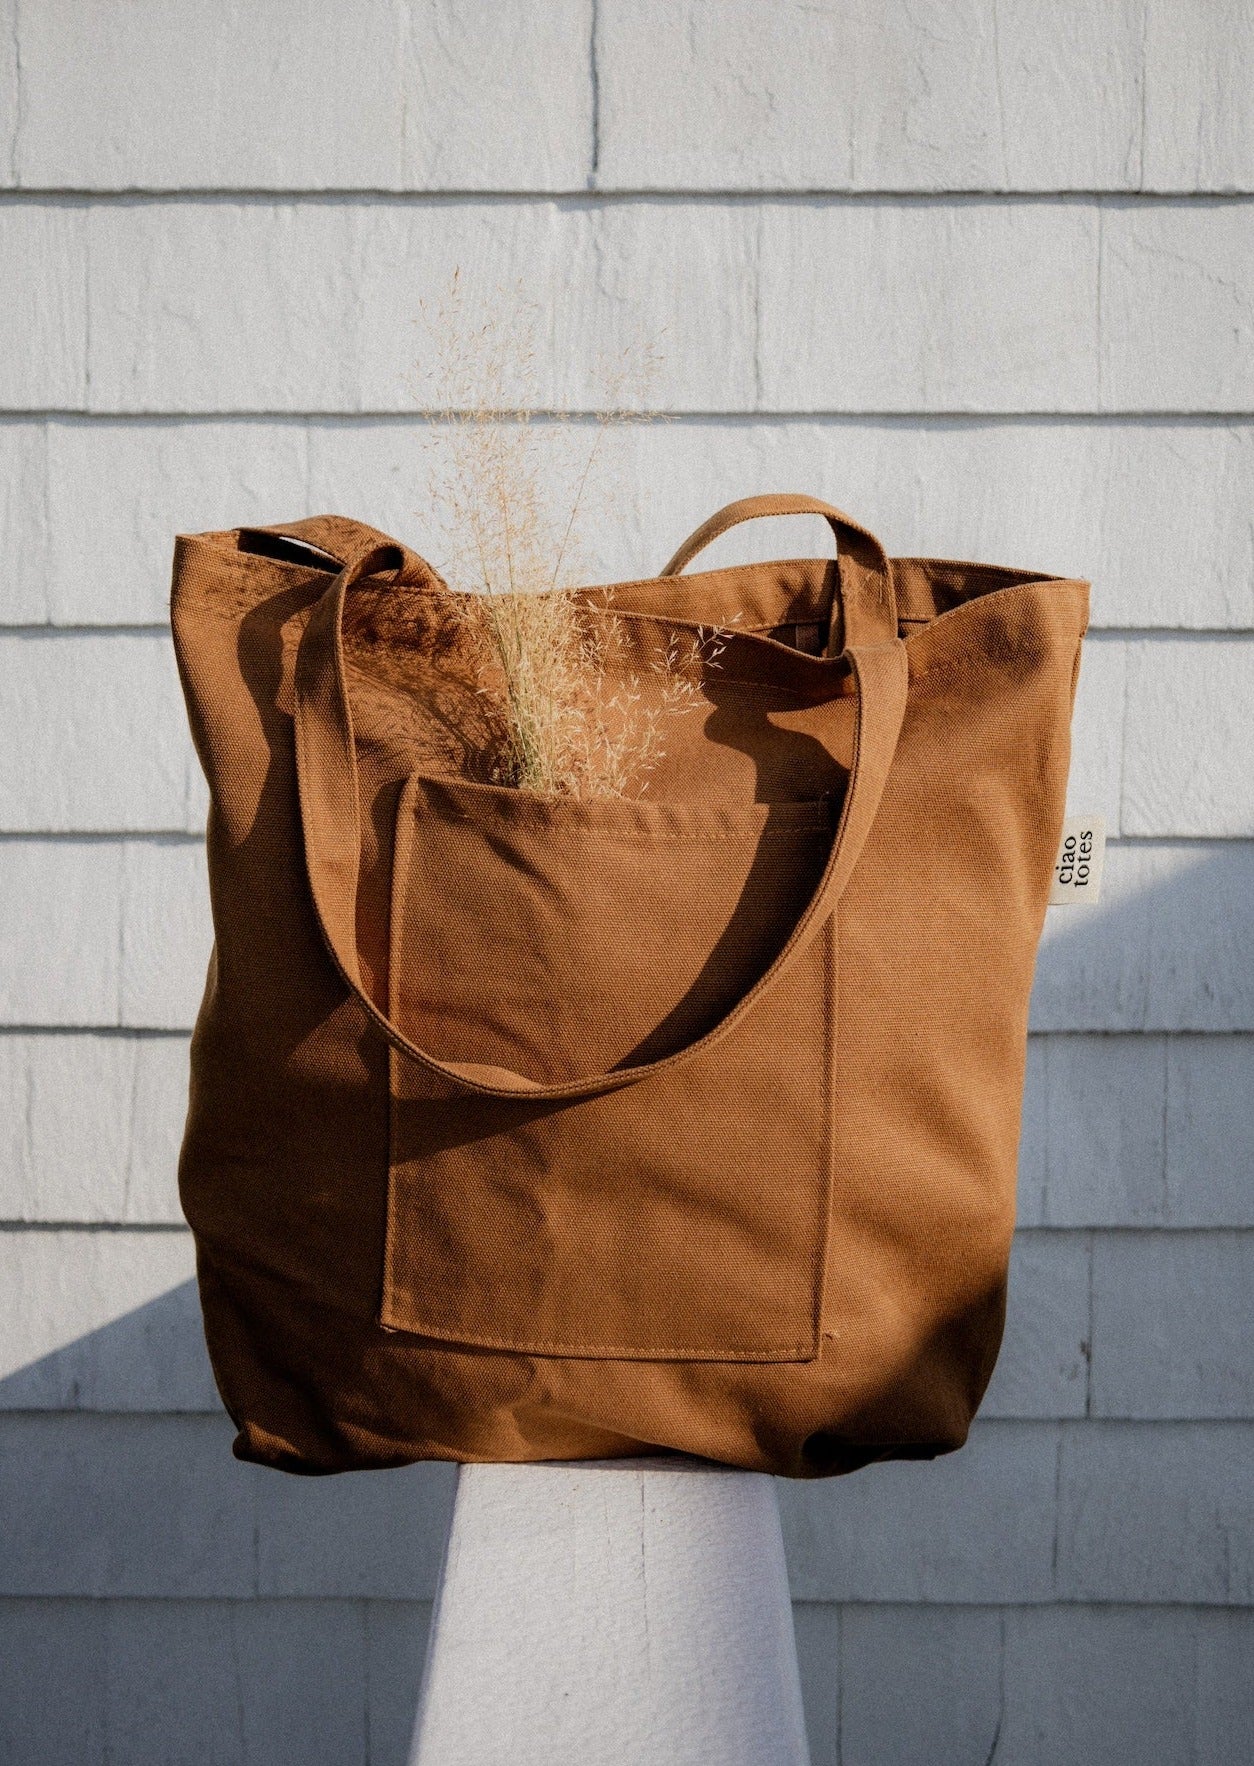 tote bags | ciao totes